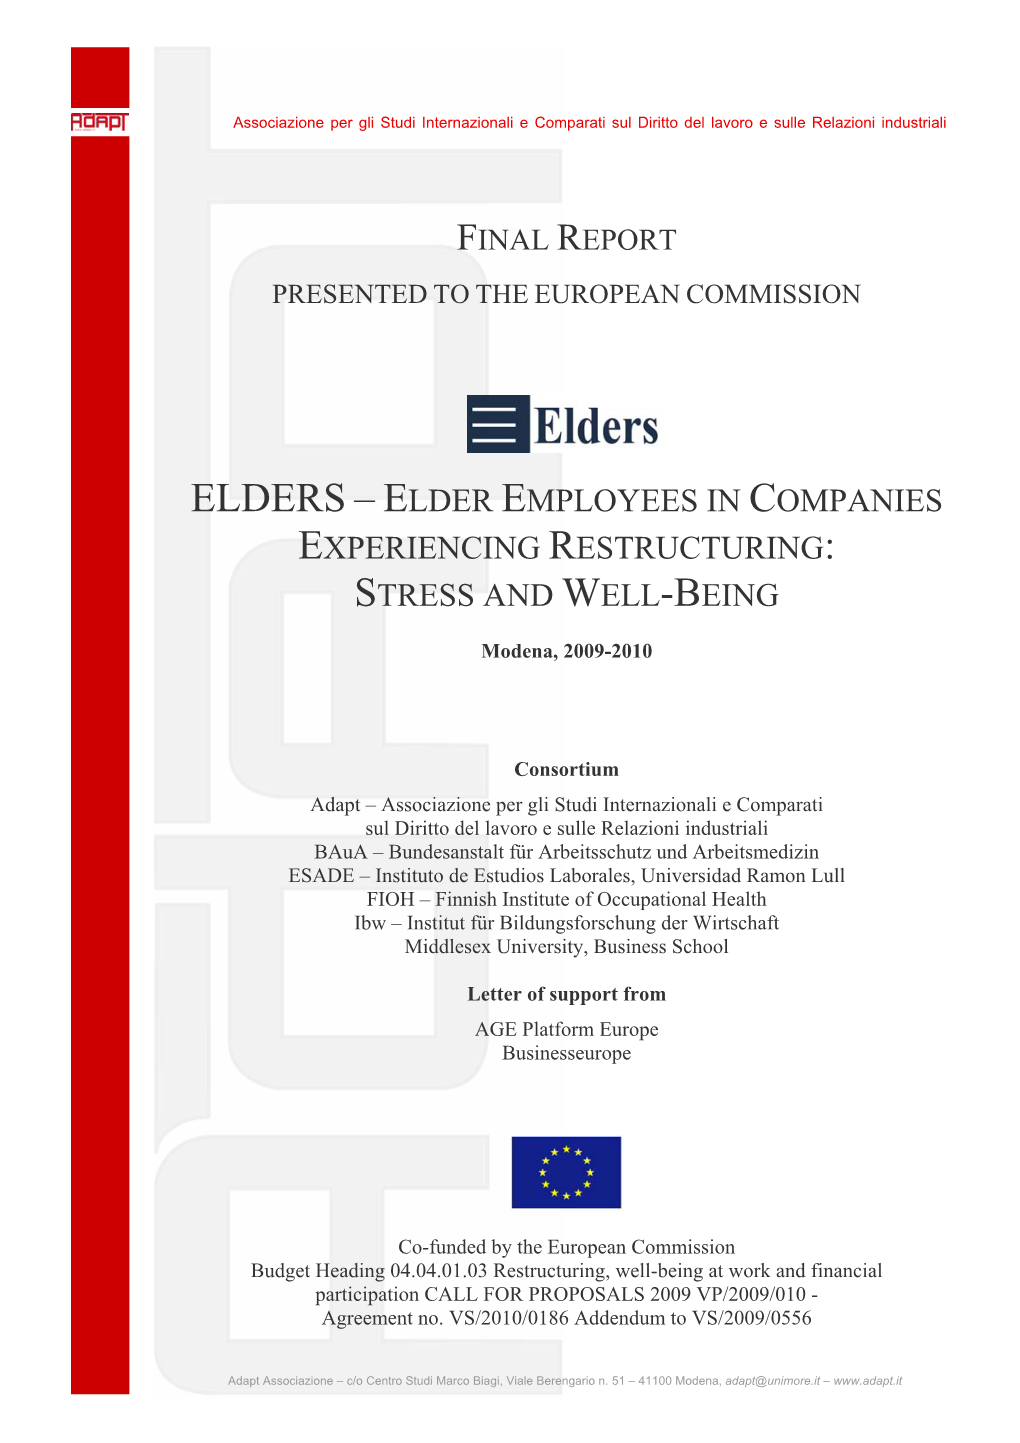 Elders – Elder Employees in Companies Experiencing Restructuring: Stress and Well-Being